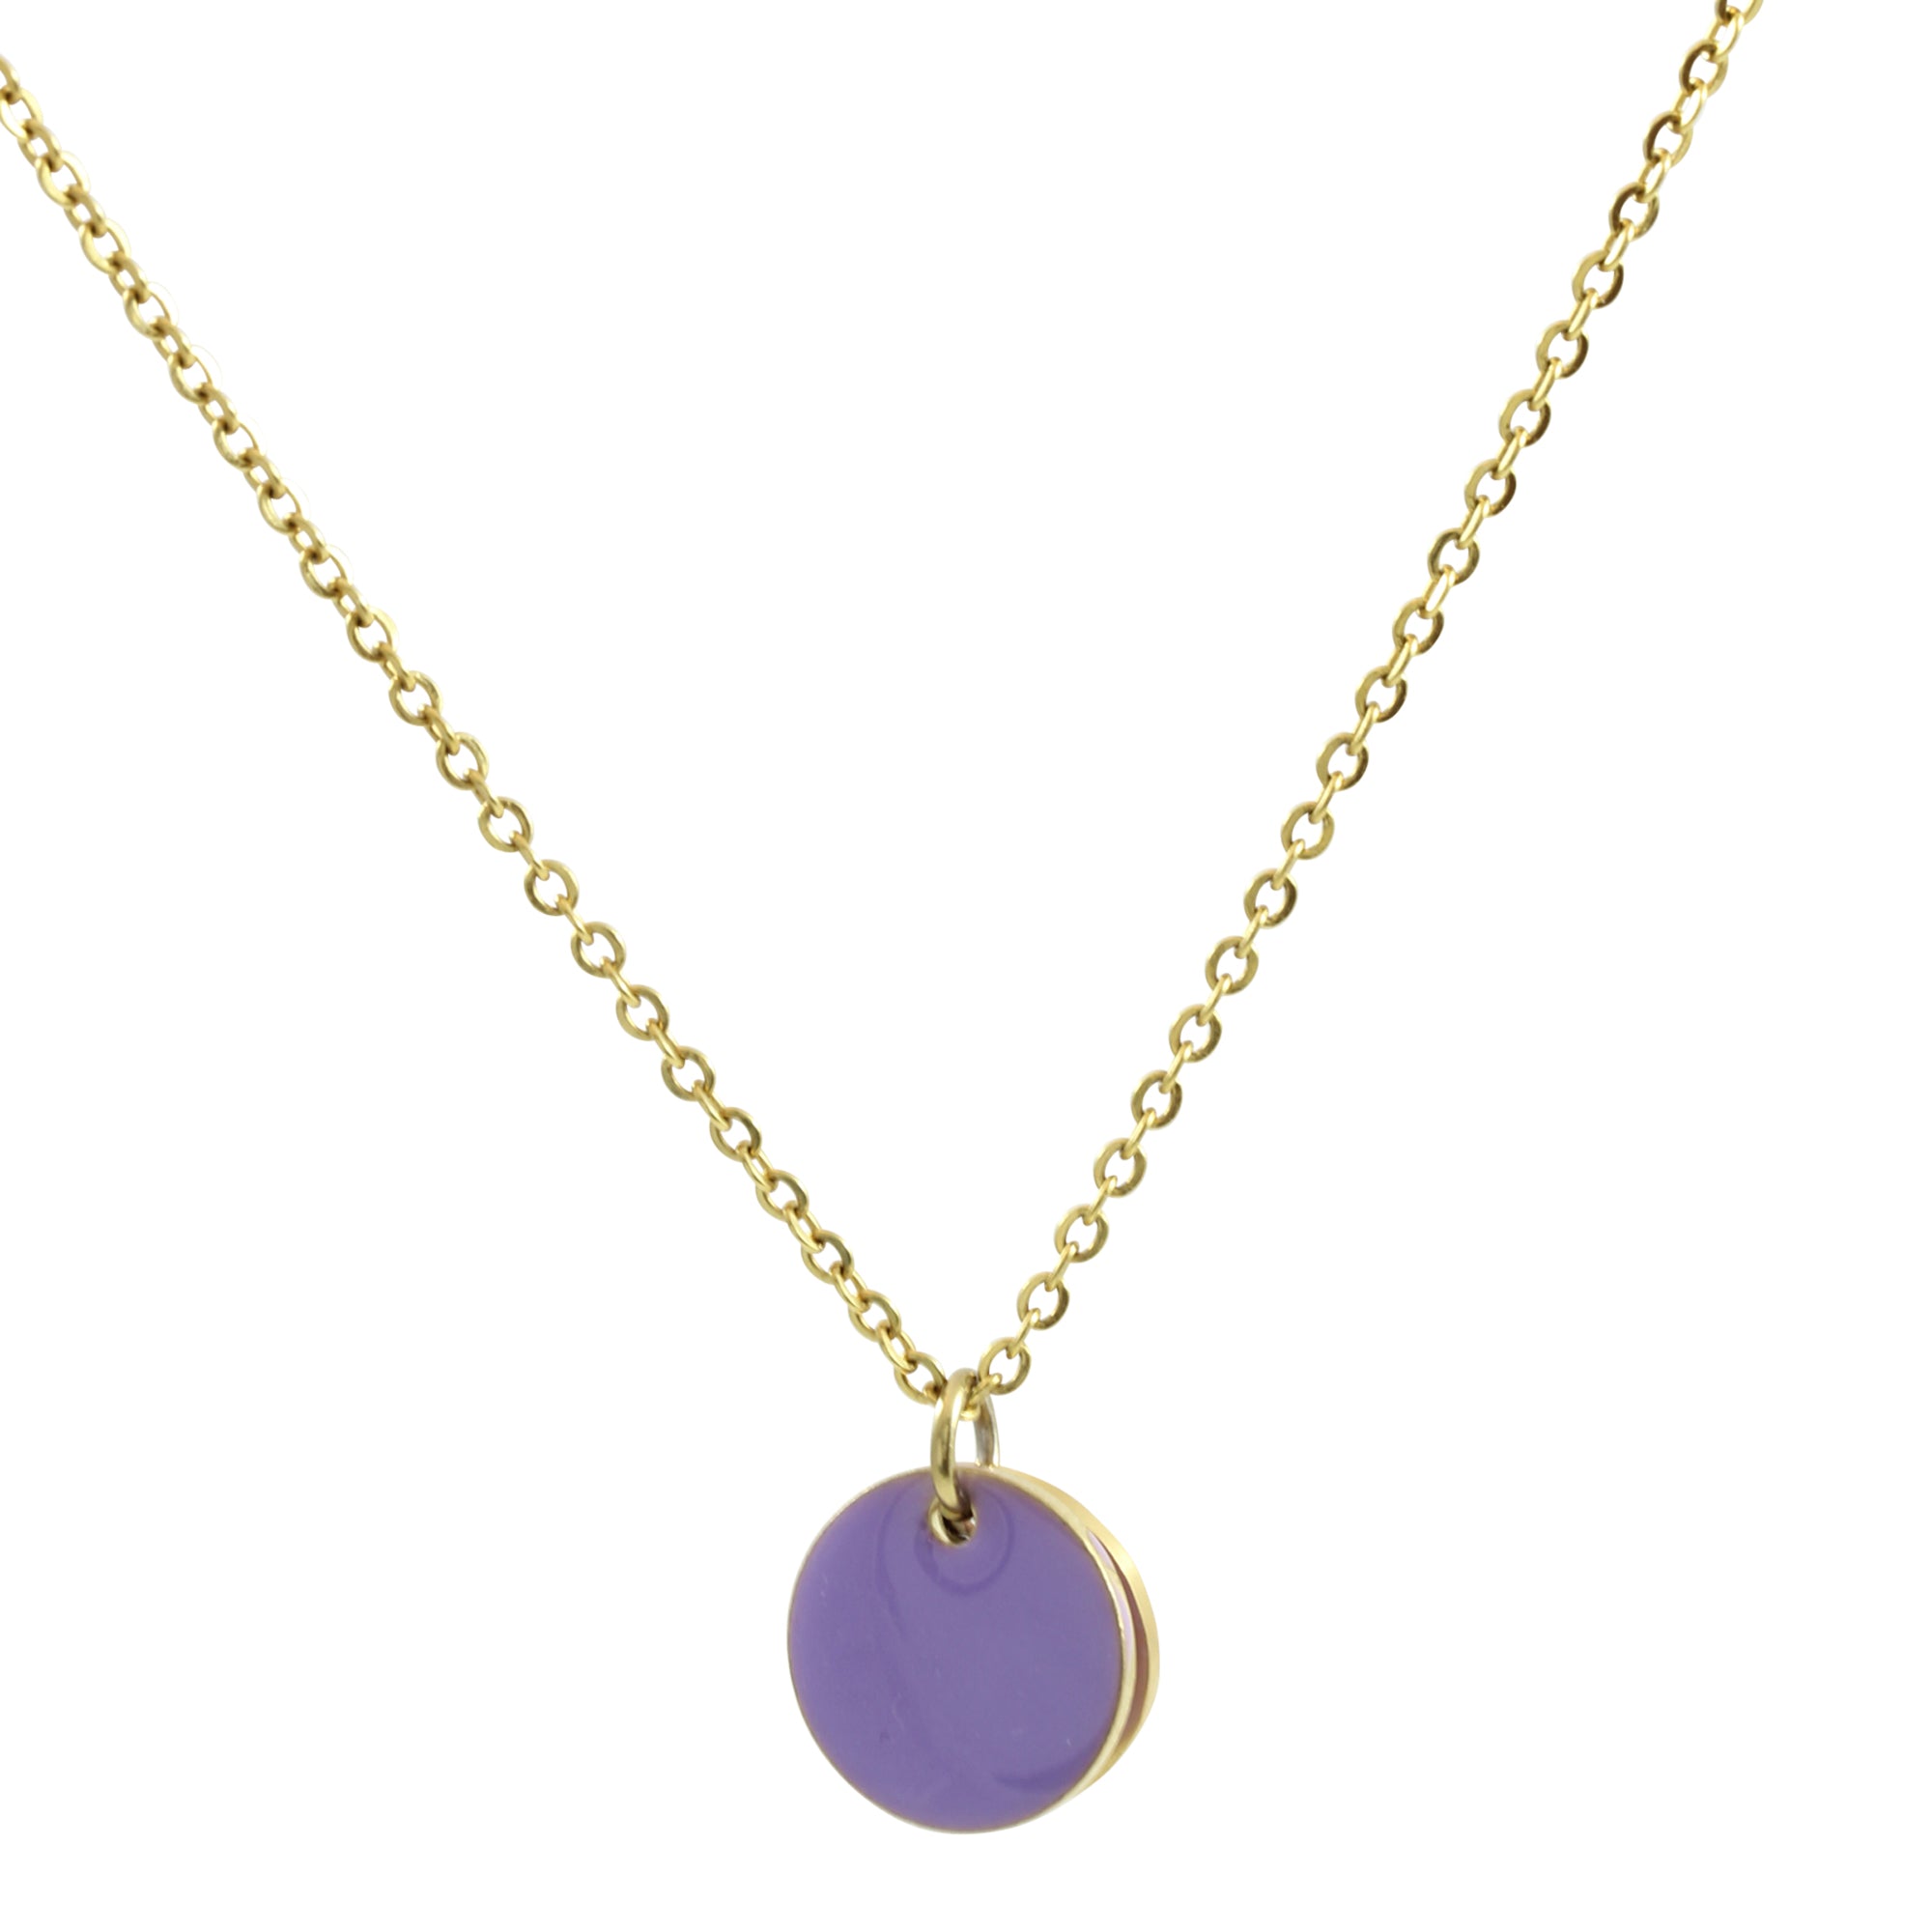 "Le Délice" Waterproof "Imperméable” Personalized Initial Gold Necklace with Lavender Enamel Charm